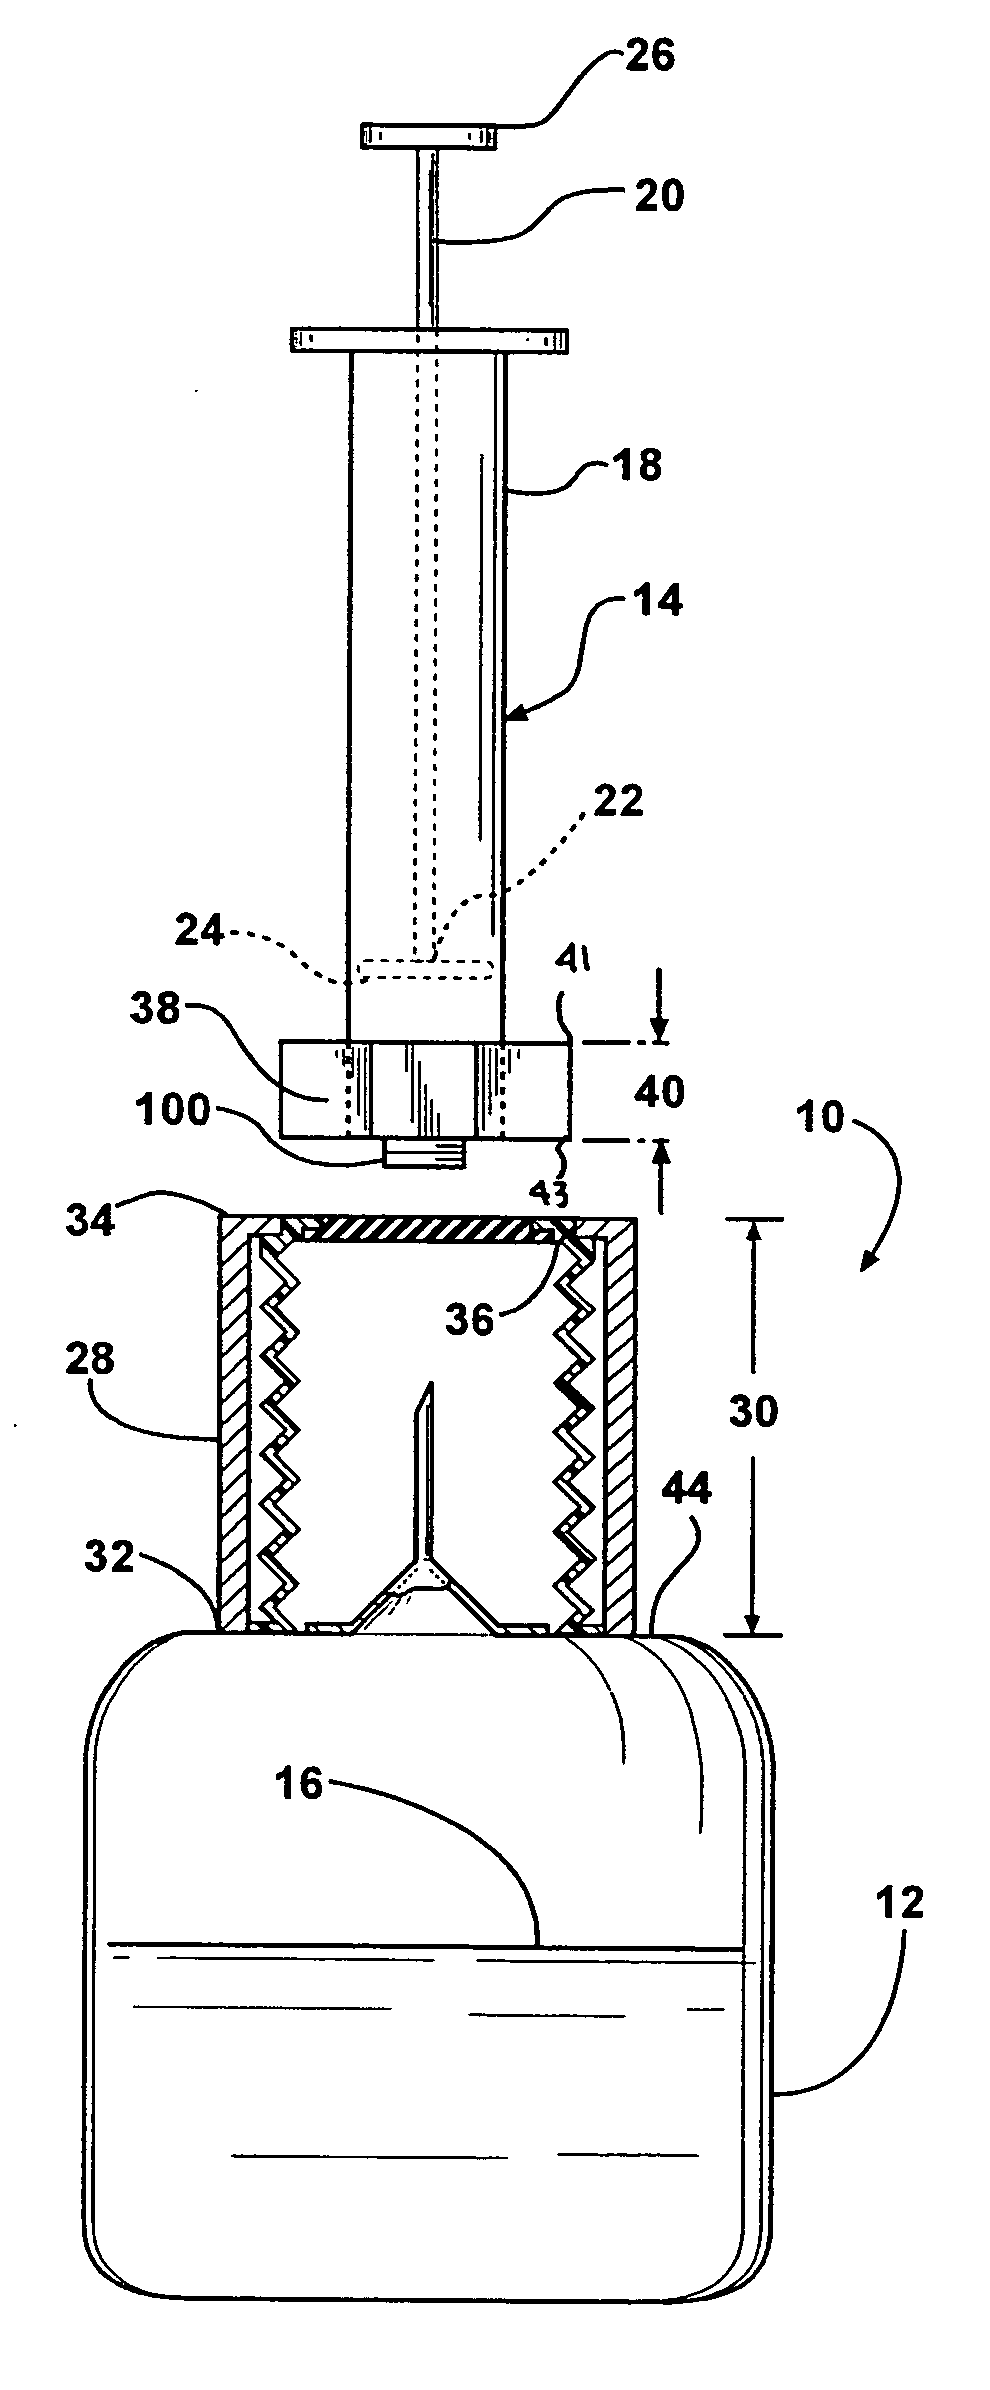 Needle-less fluid delivery assembly and error prevention system